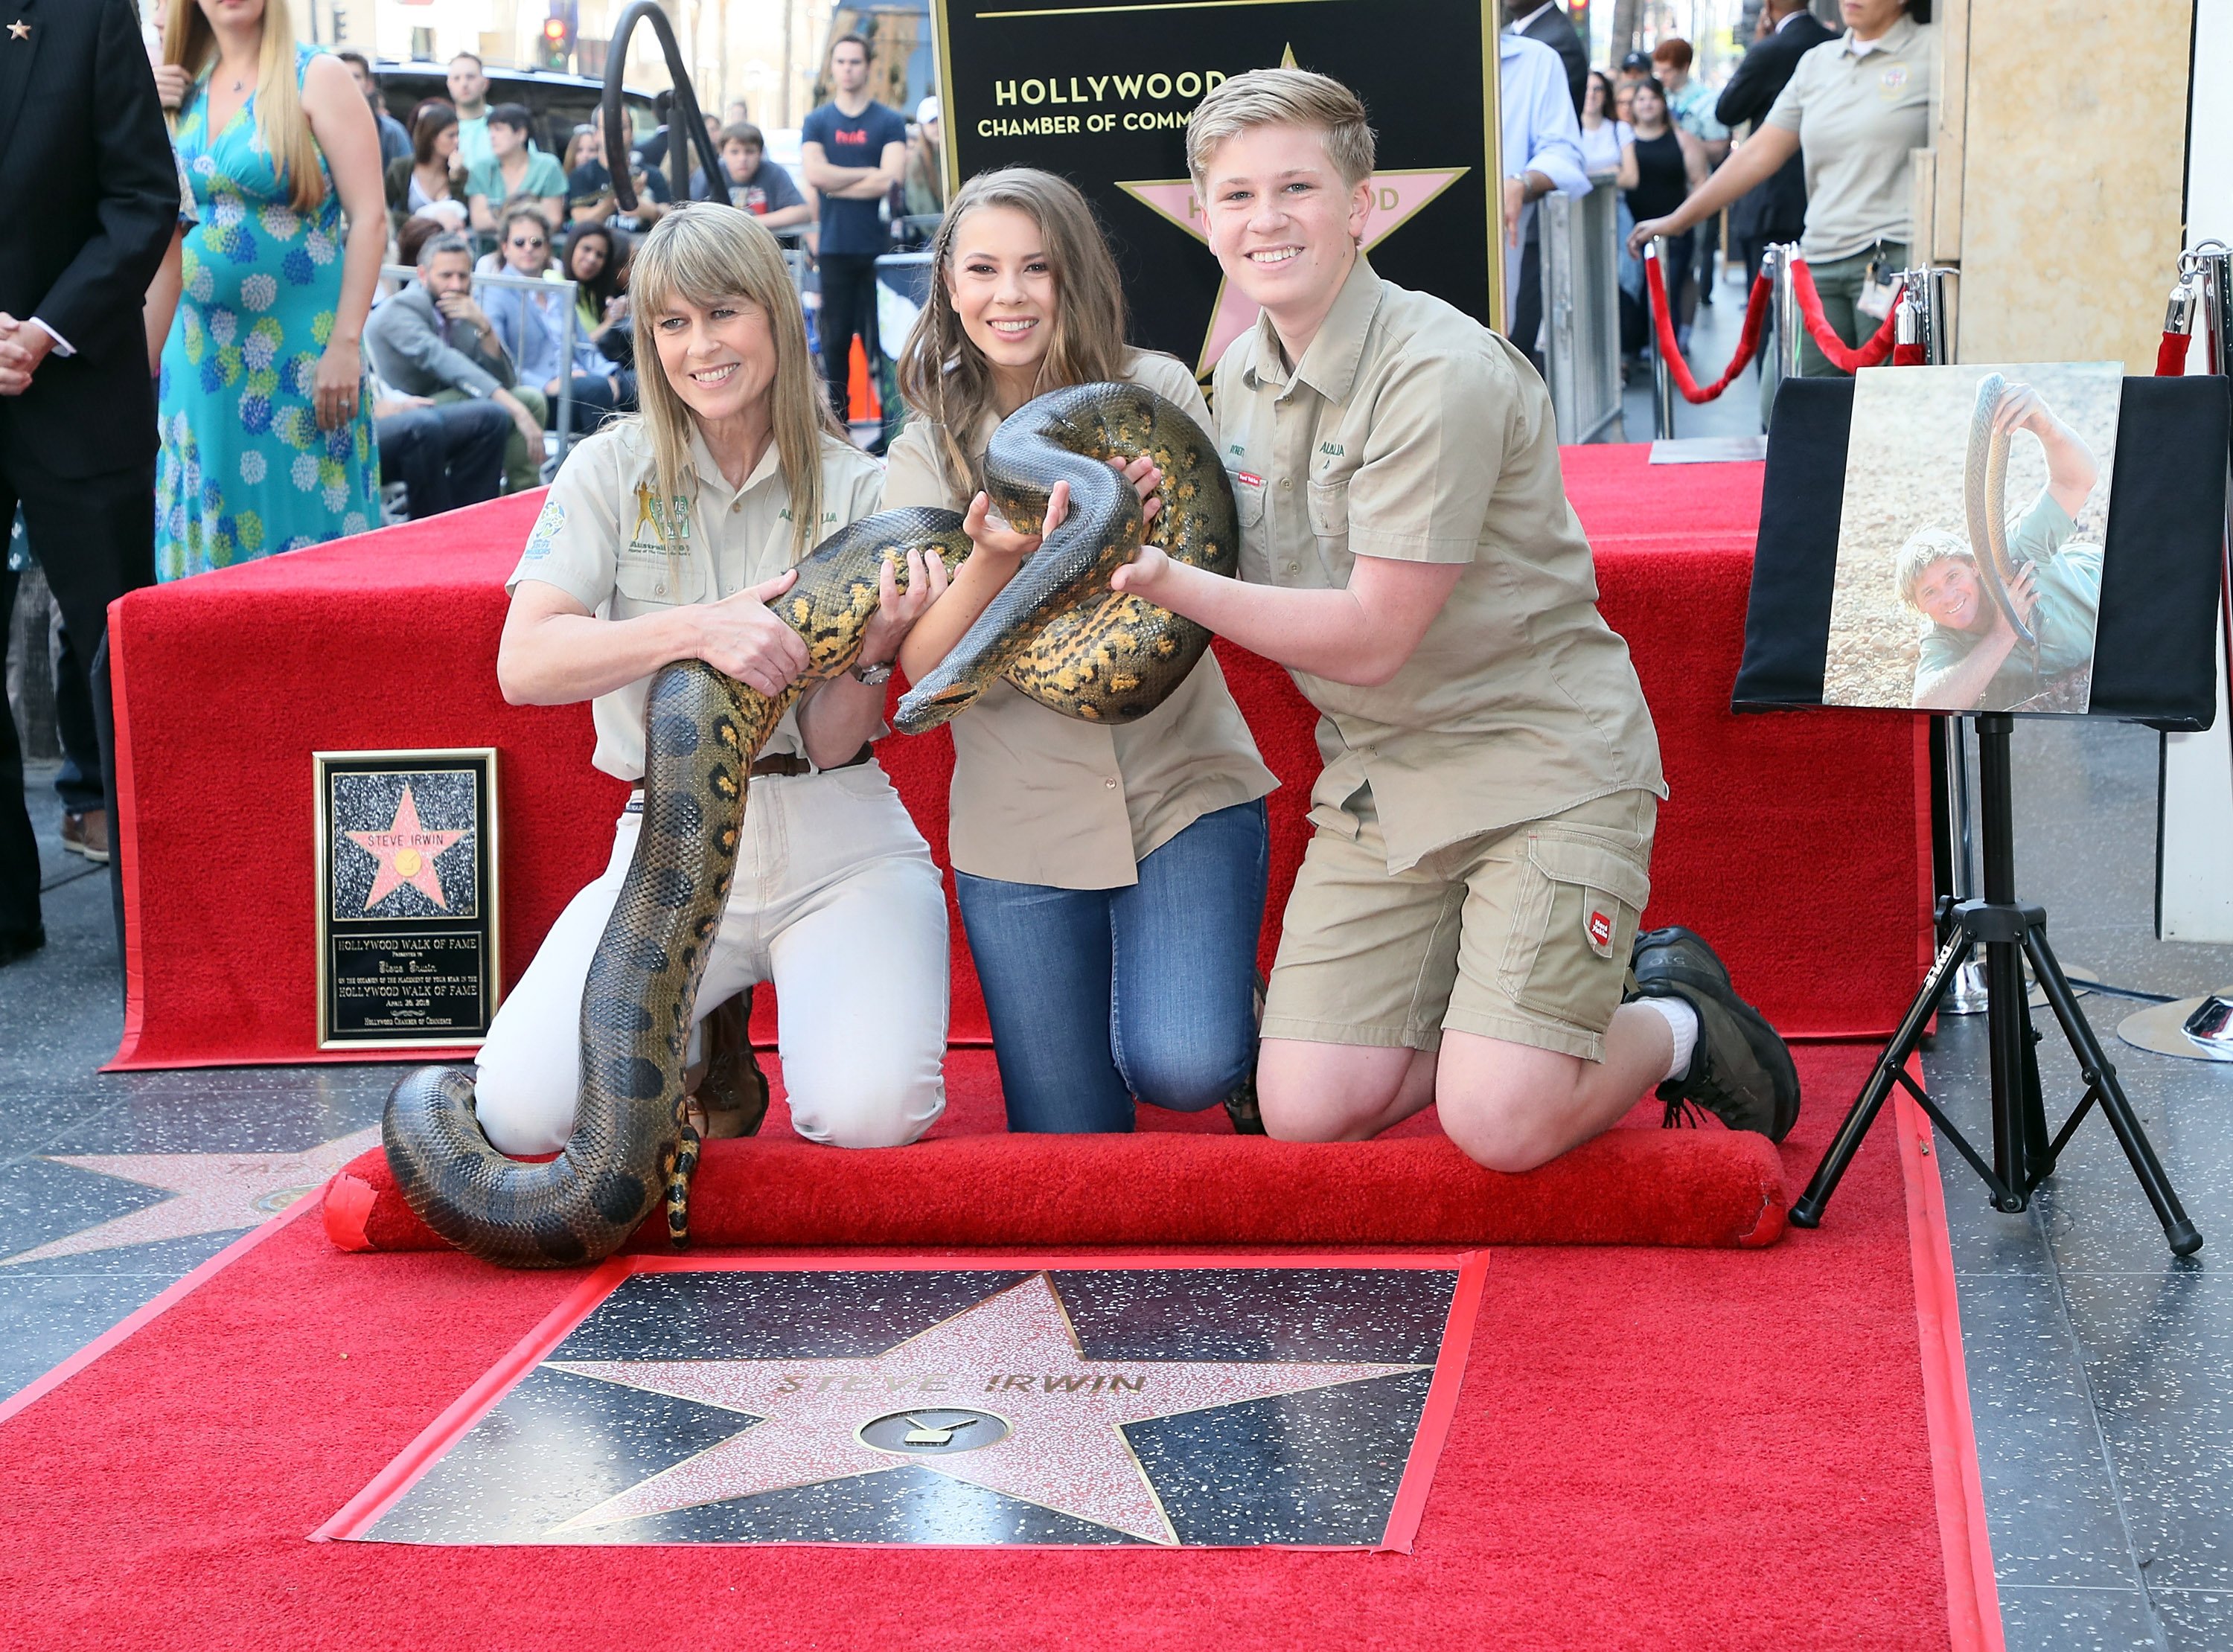 Terri Irwin, Bindi Irwin and Robert Irwin celebrating Steve Irwin being honored posthumously with a Star on the Hollywood Walk of Fame in Hollywood, California | Photo: David Livingston/Getty Images